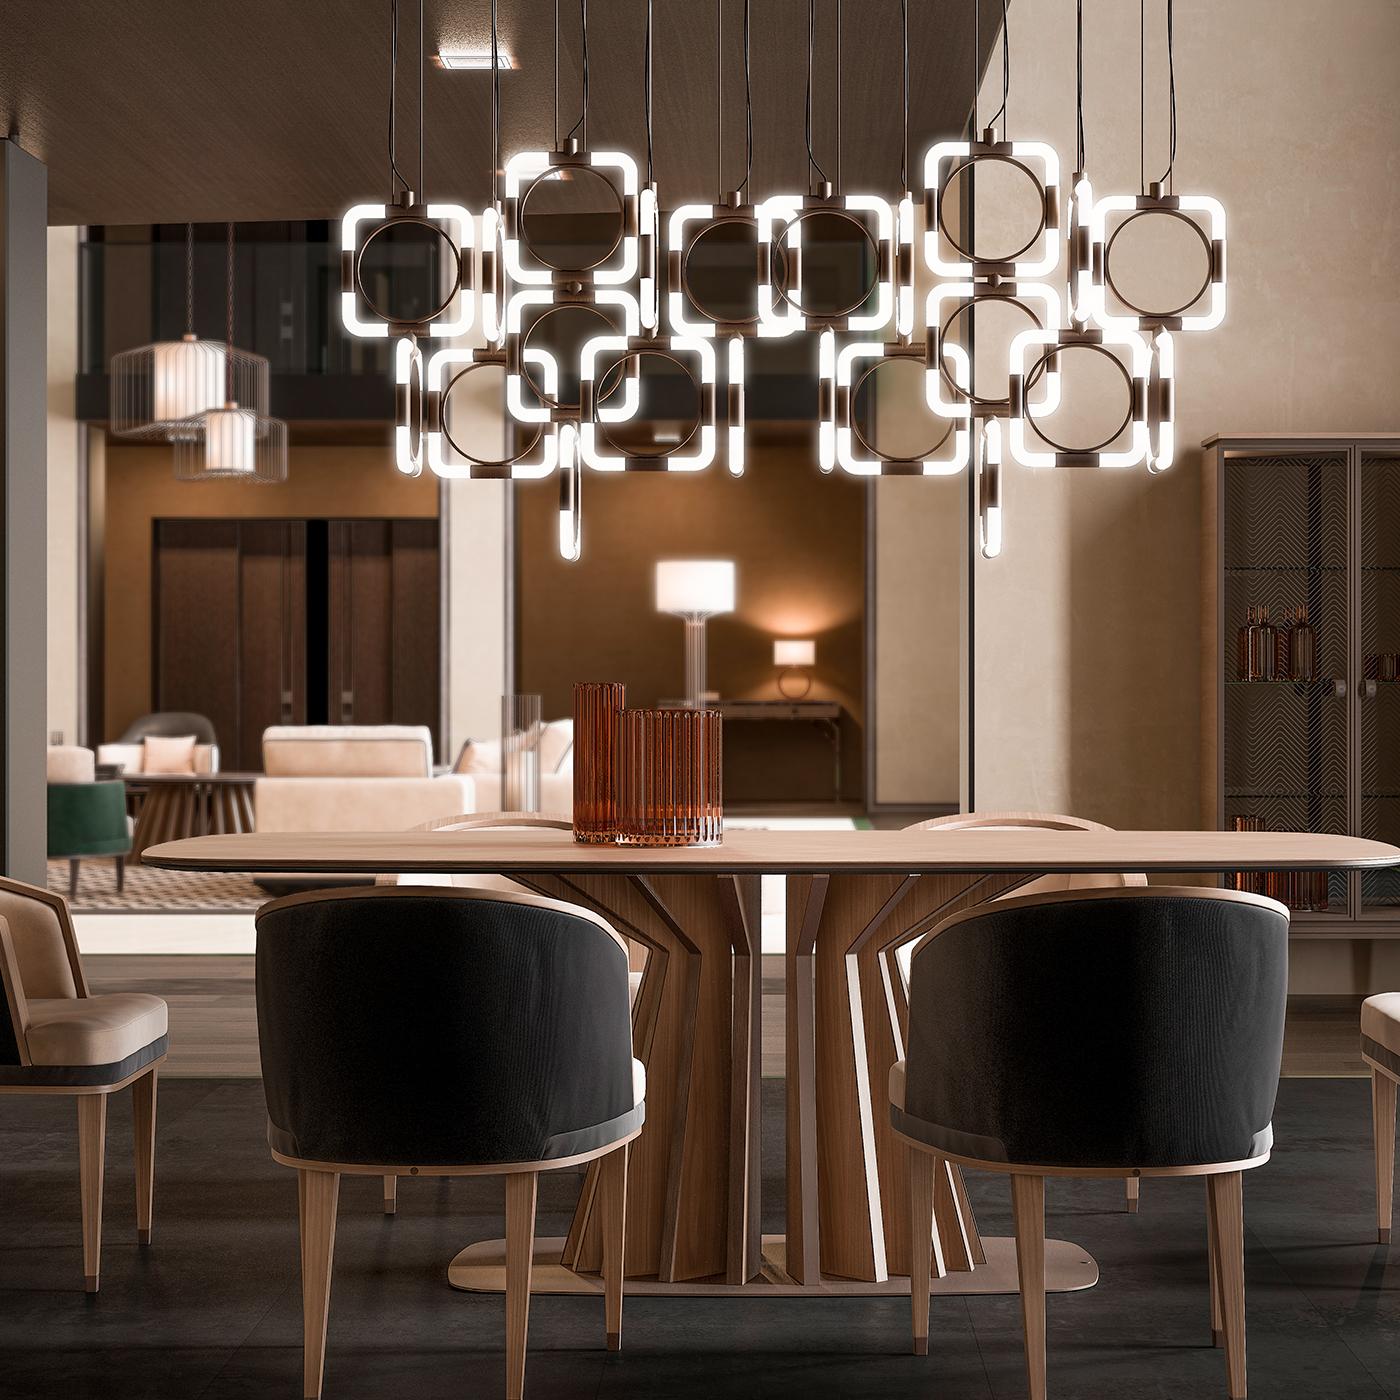 A display of geometric design, this chain chandelier will be the talking point of the room. Featuring a metal structure and tubular lighting, the chic and spirited chandelier will add an element of fun and creativity to your contemporary style